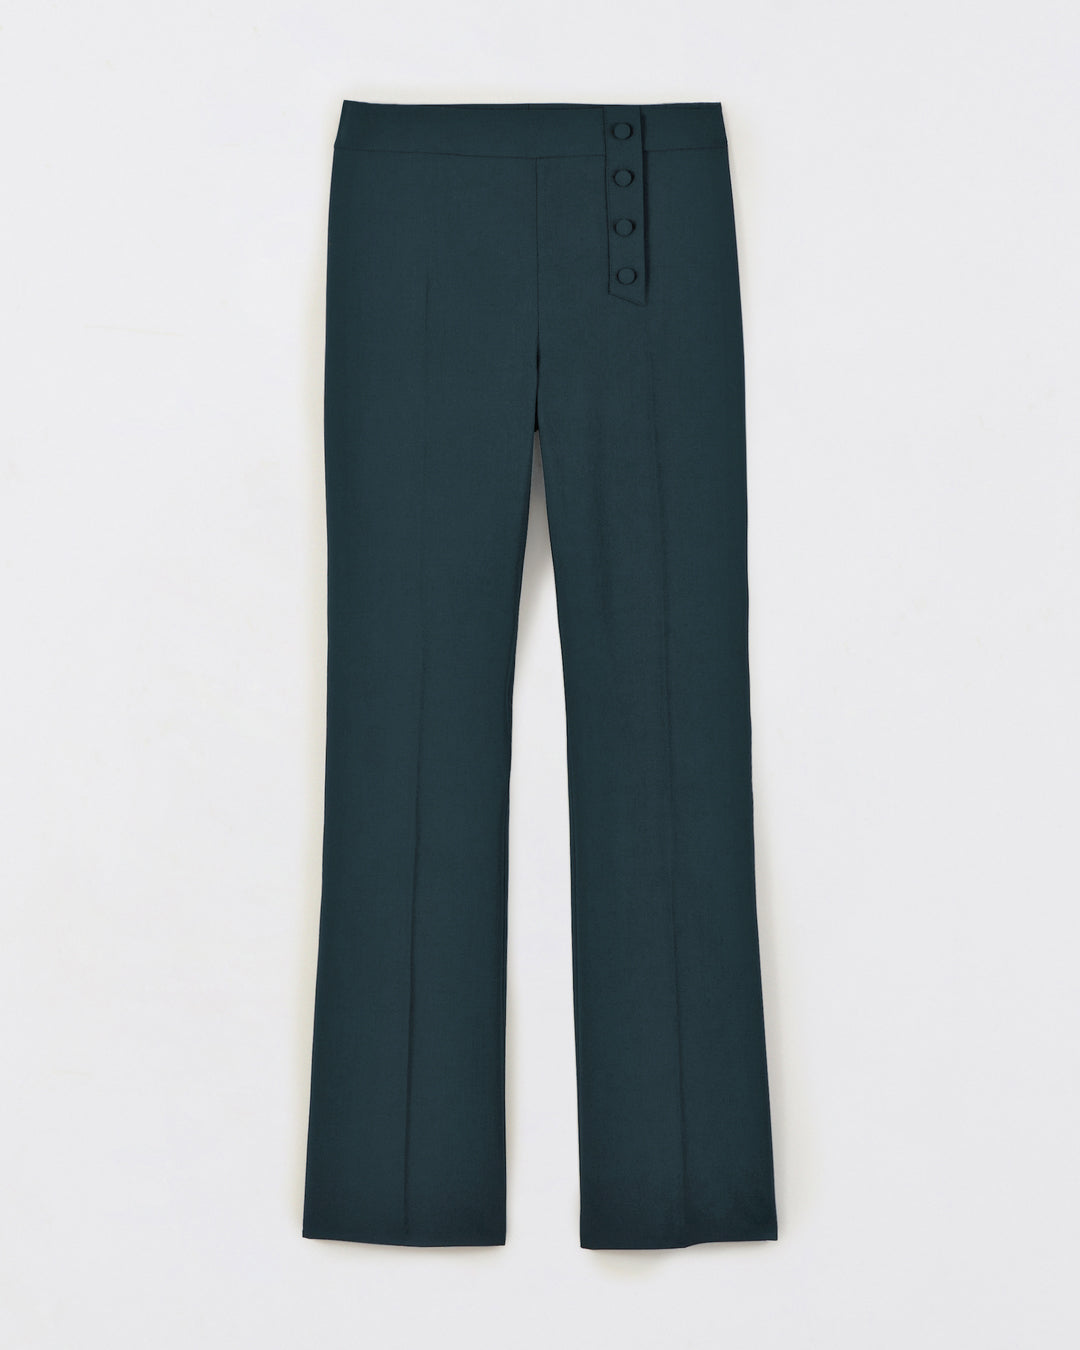 Trouser-tailor-green-High-waist-Cut-flair-vented-at-ankles-Decoration-buttons-covered-asymmetrical-Zipper-side-17H10-tailors-for-women-paris-